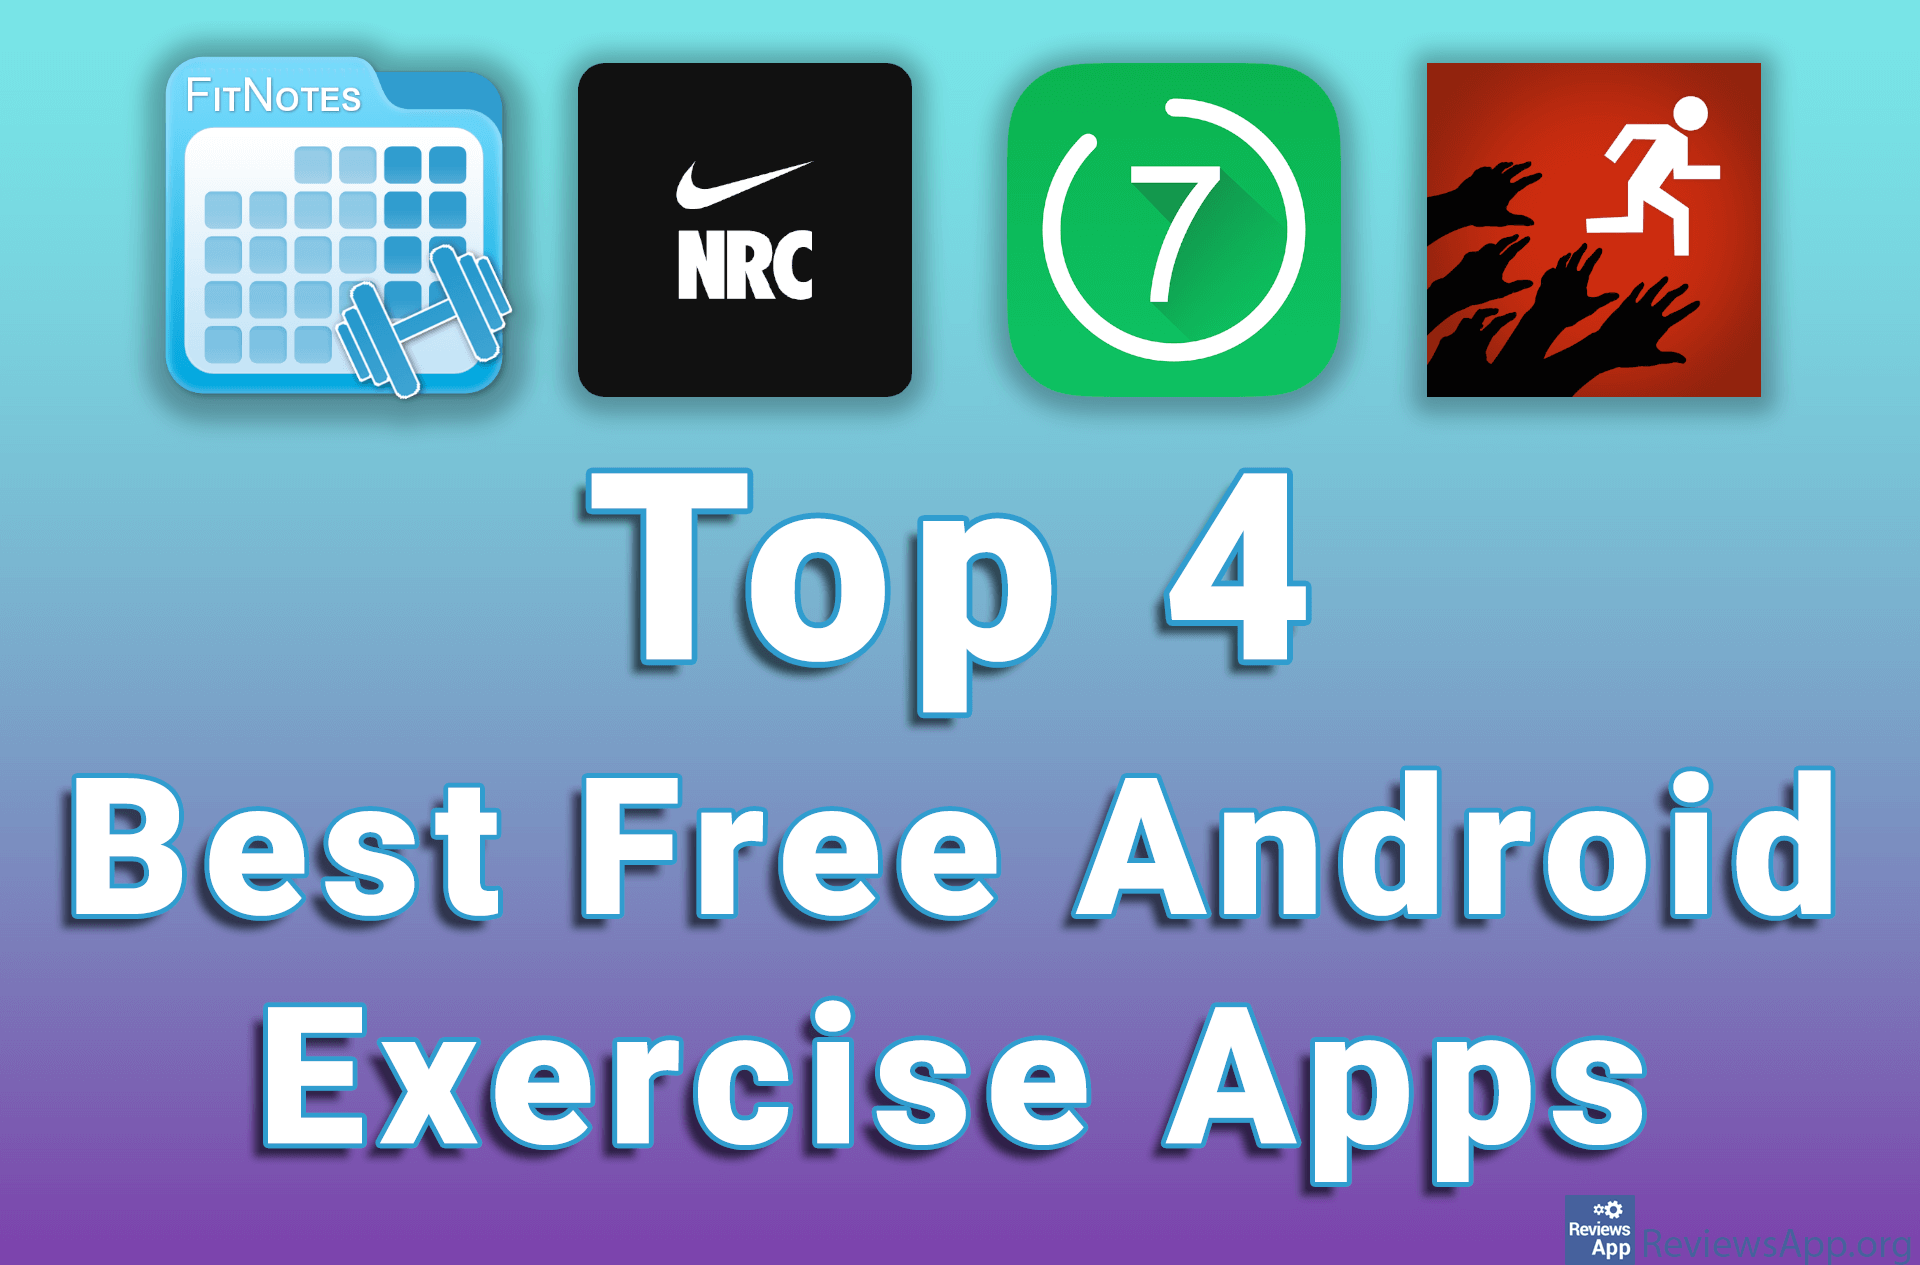 Top 4 Best Free Android Exercise Apps